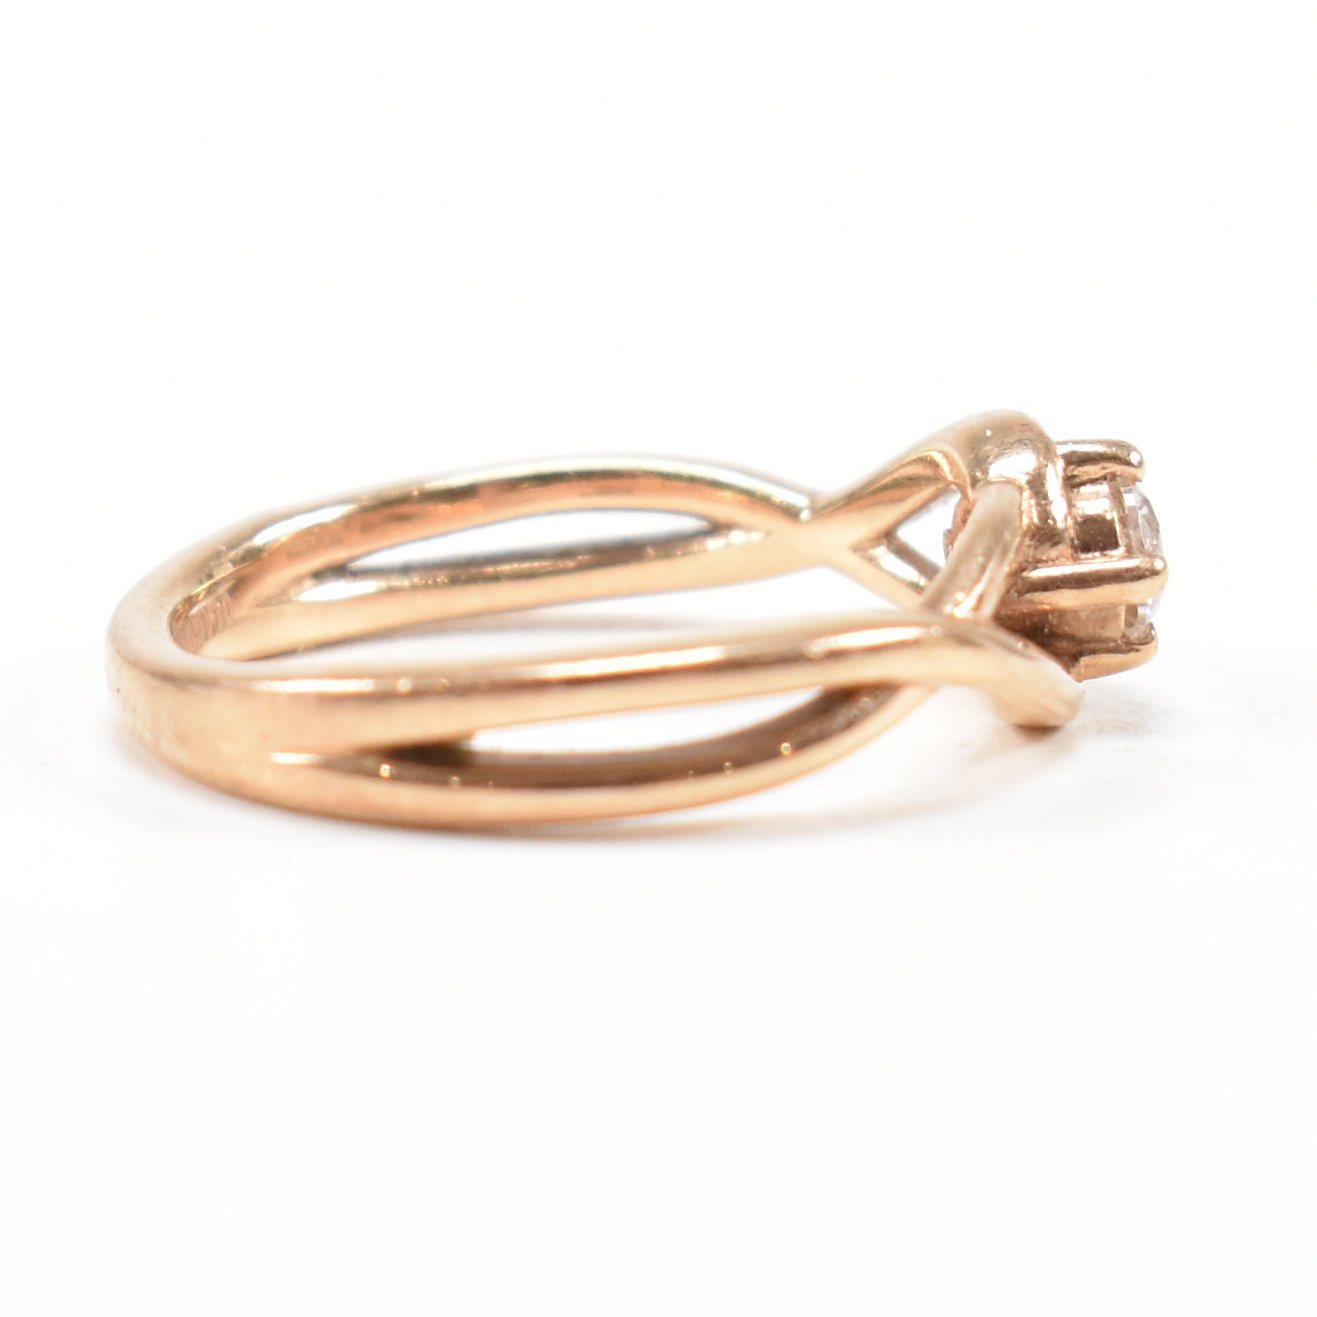 HALLMARKED 9CT ROSE GOLD & WHITE STONE SOLITAIRE CROSSOVER RING - Image 3 of 9